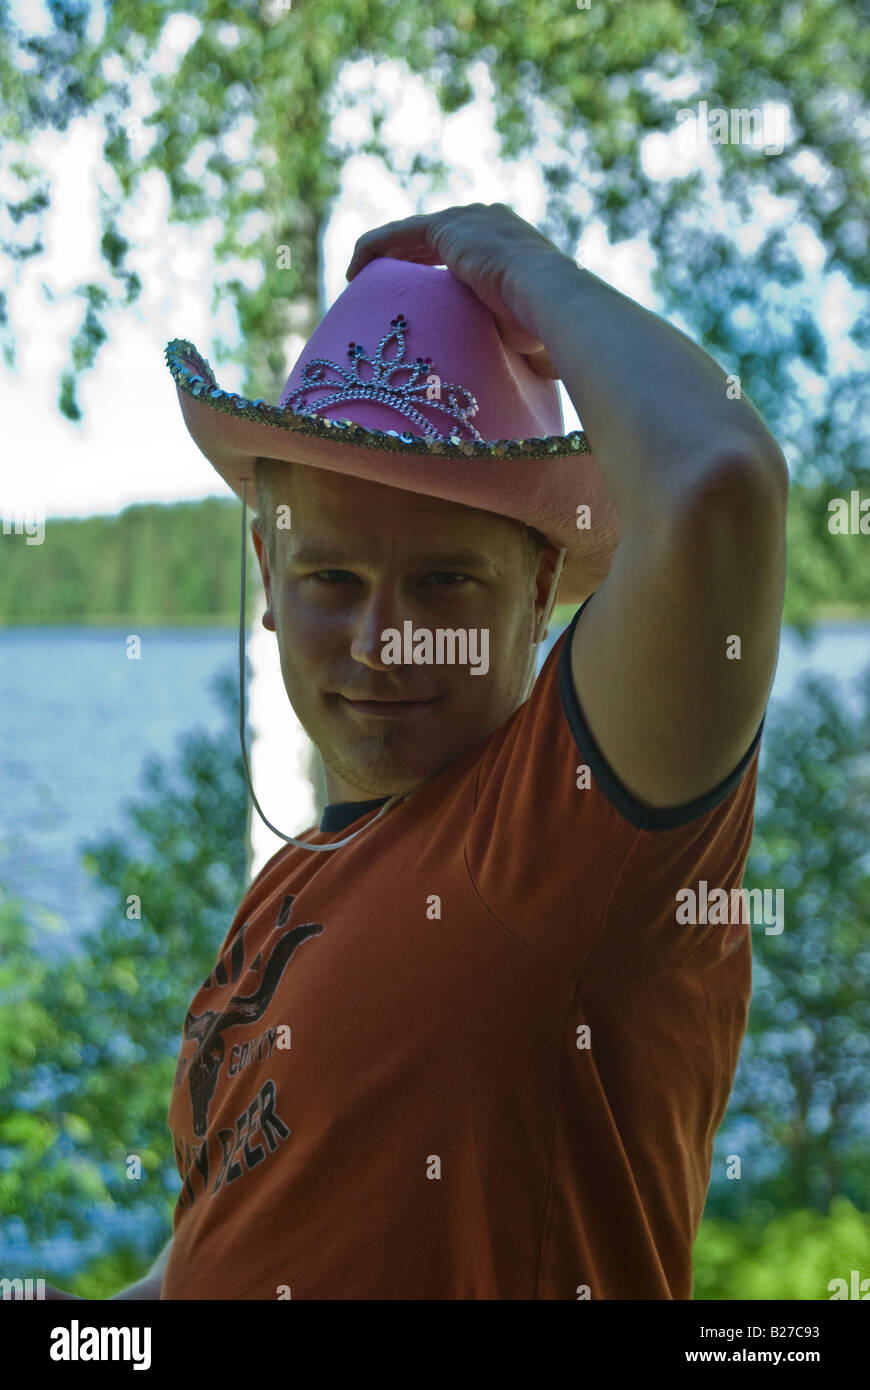 Salutation by a cowboy with a pink stetson hat Stock Photo